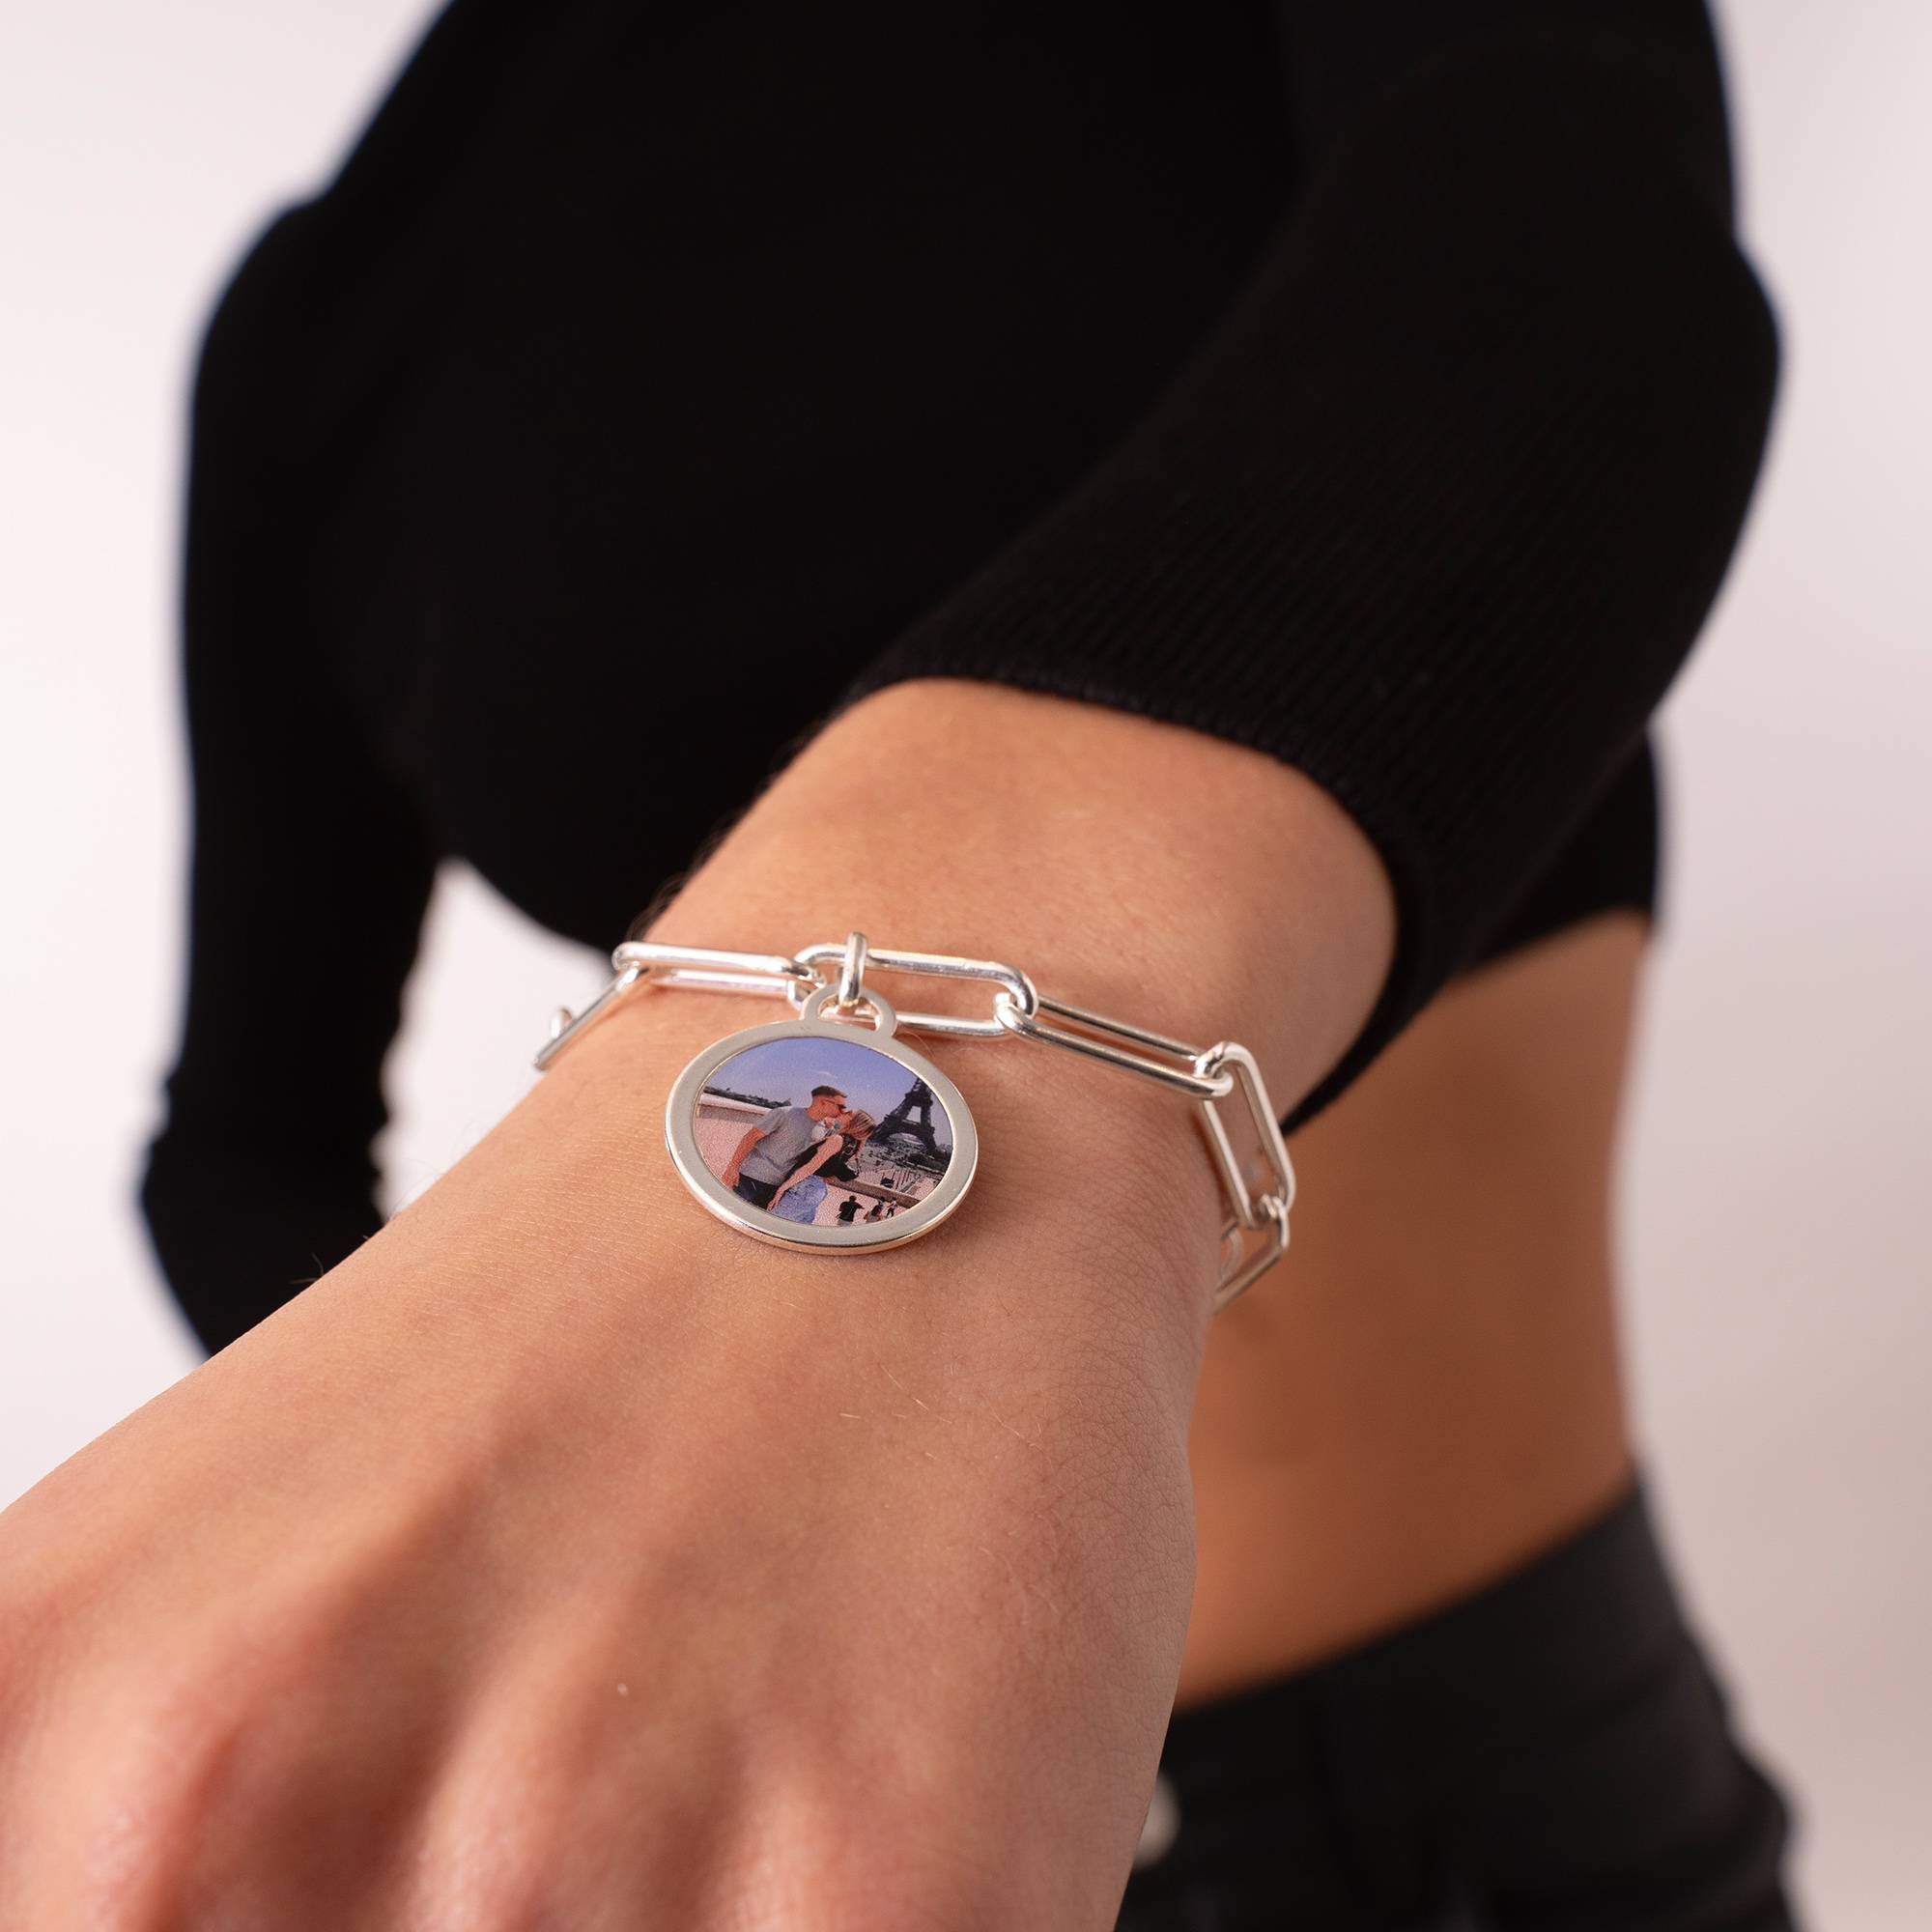 The Sweetest Photo Pendant Bracelet in Sterling Silver-4 product photo